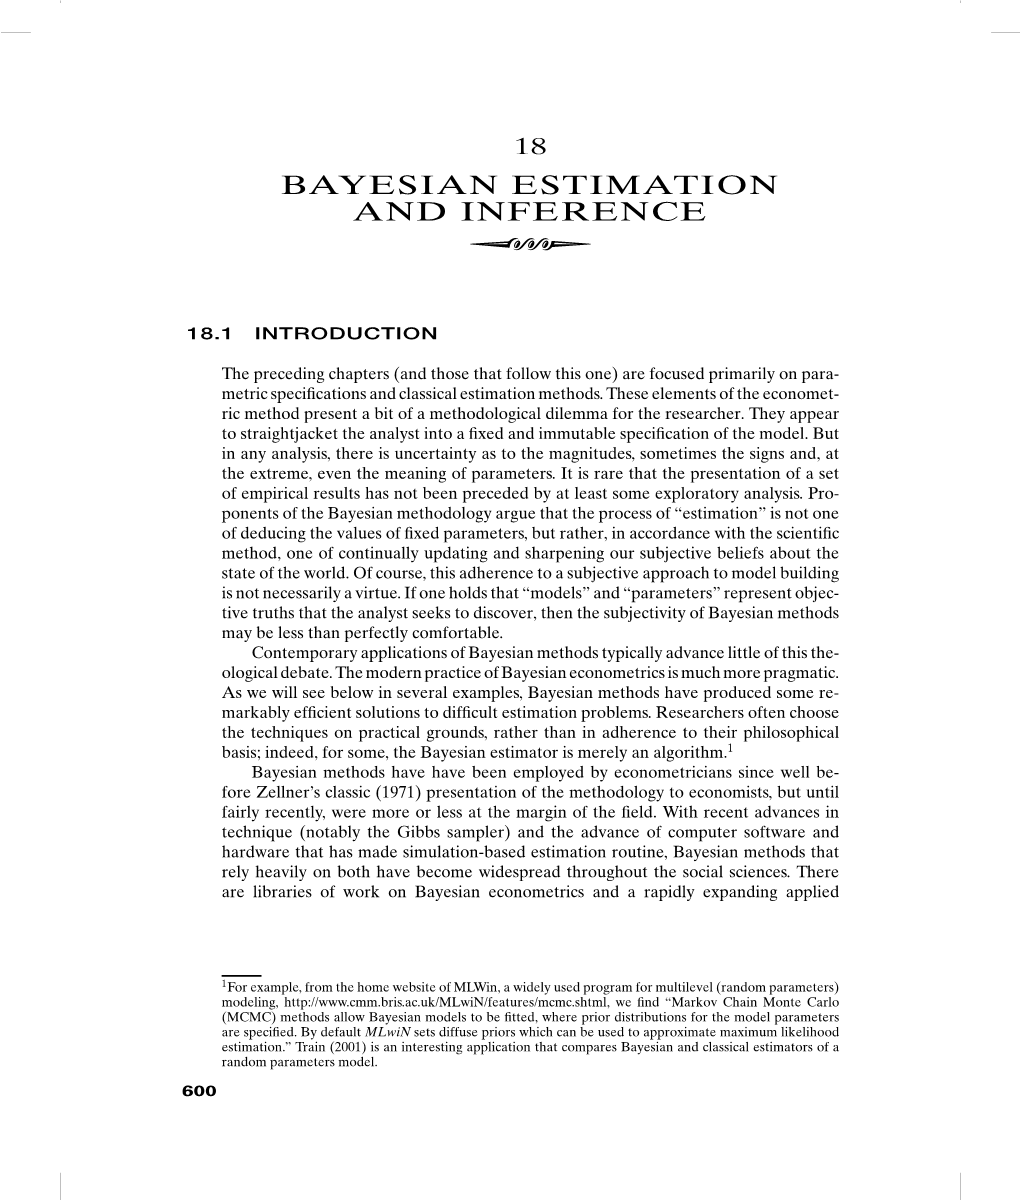 Bayesian Estimation and Inferenceq